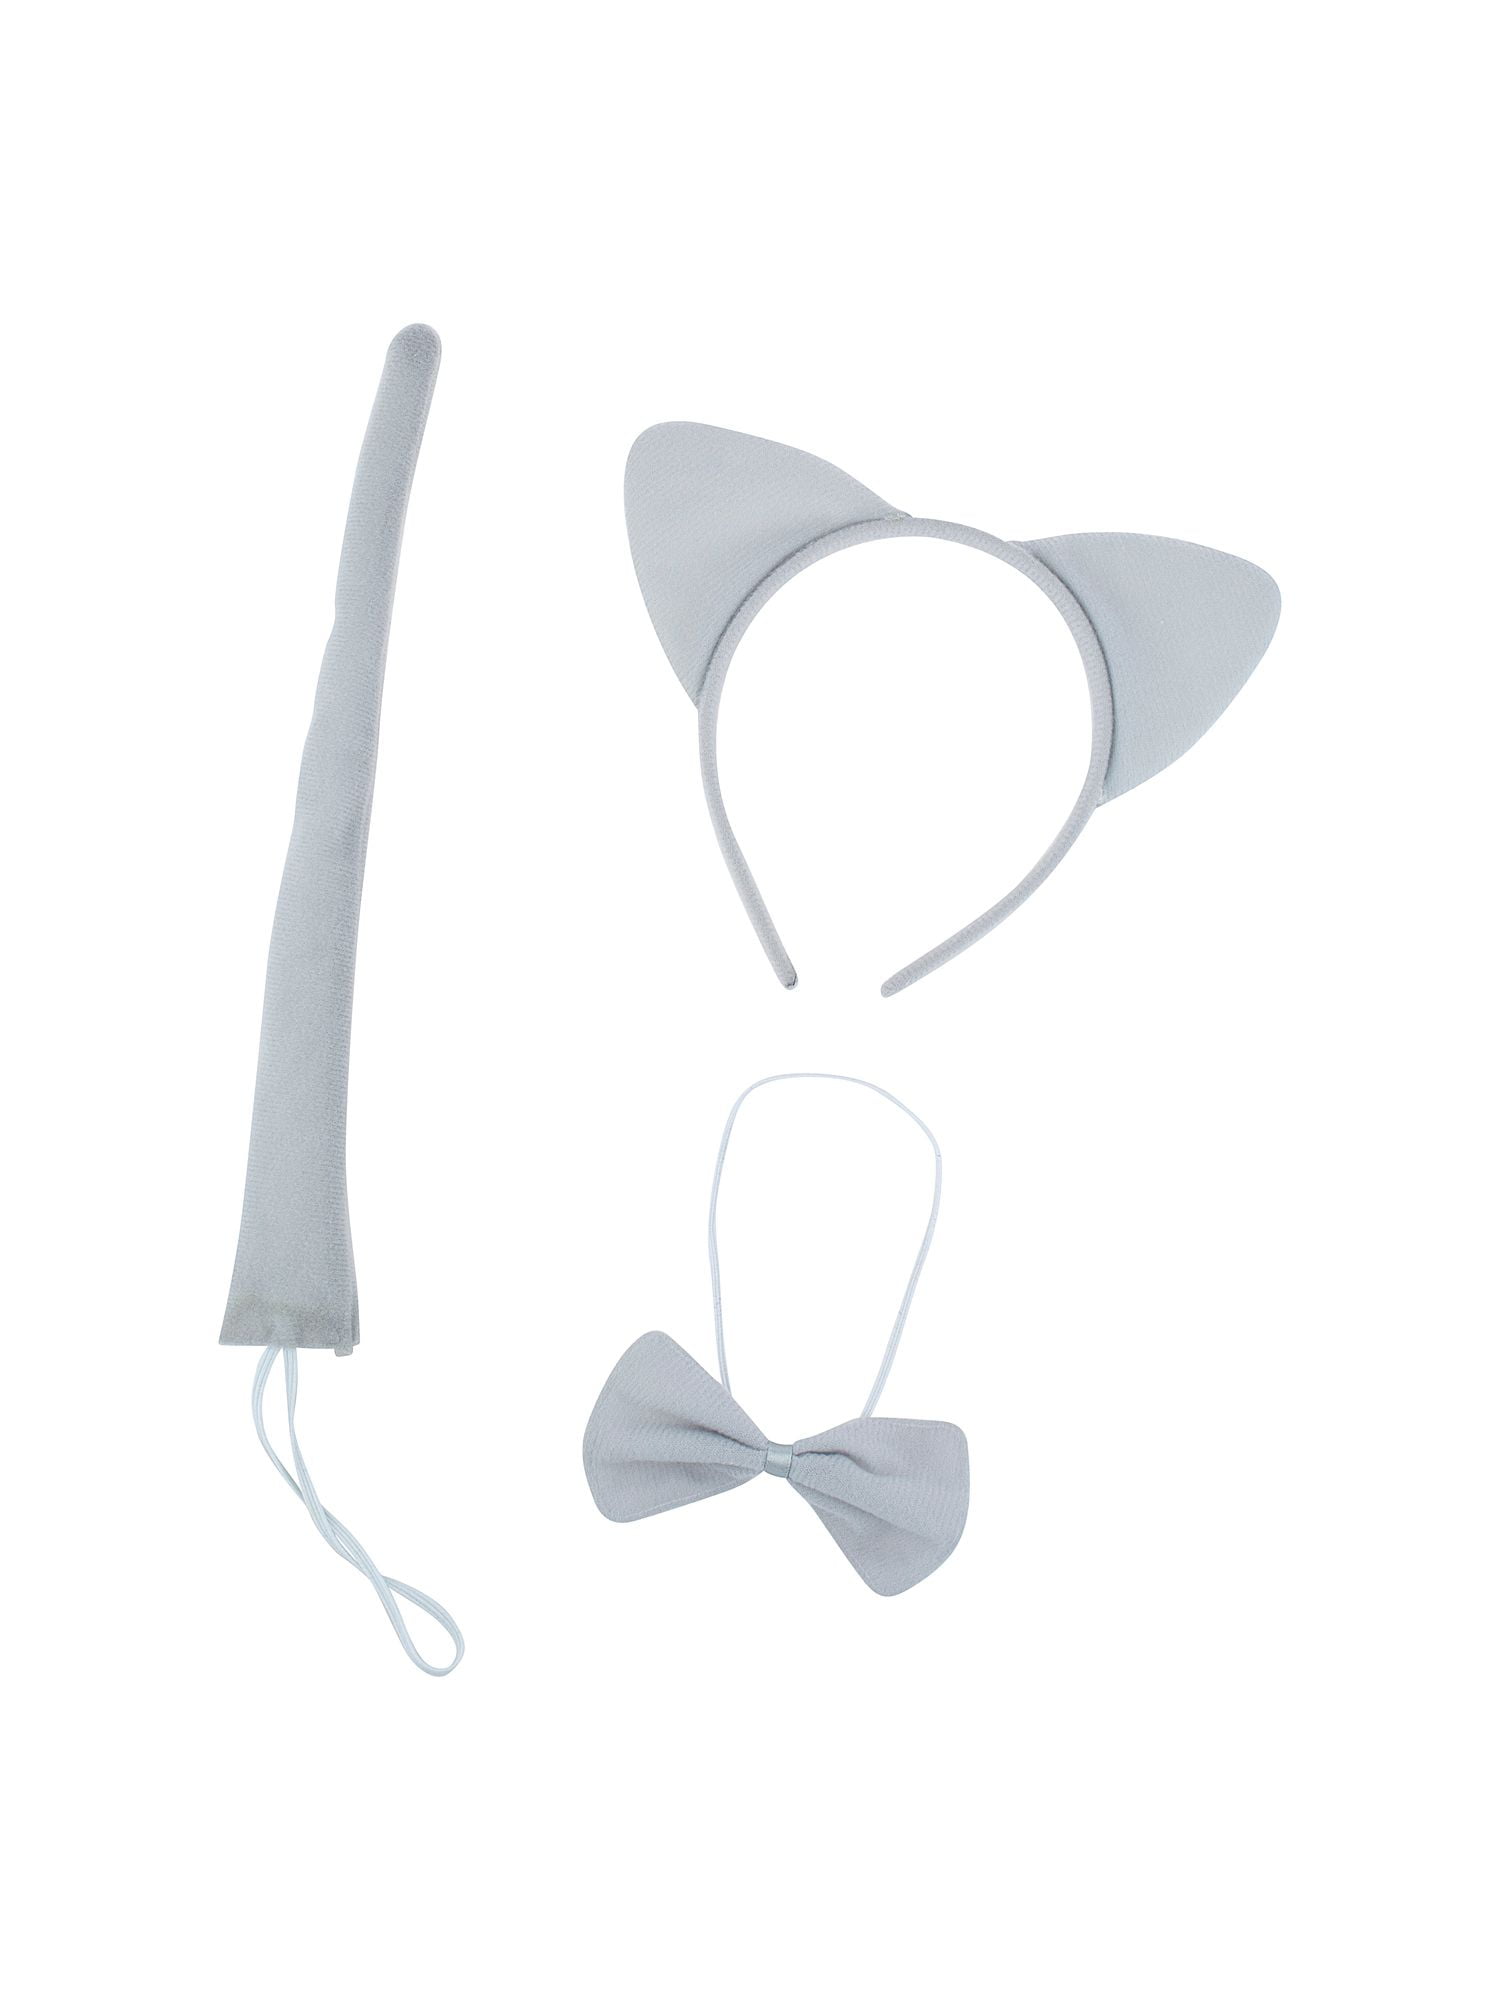 WHITE CAT Animal Fancy Dress Set Ears Tail & Bow Tie Kit Costume Accessory Book 